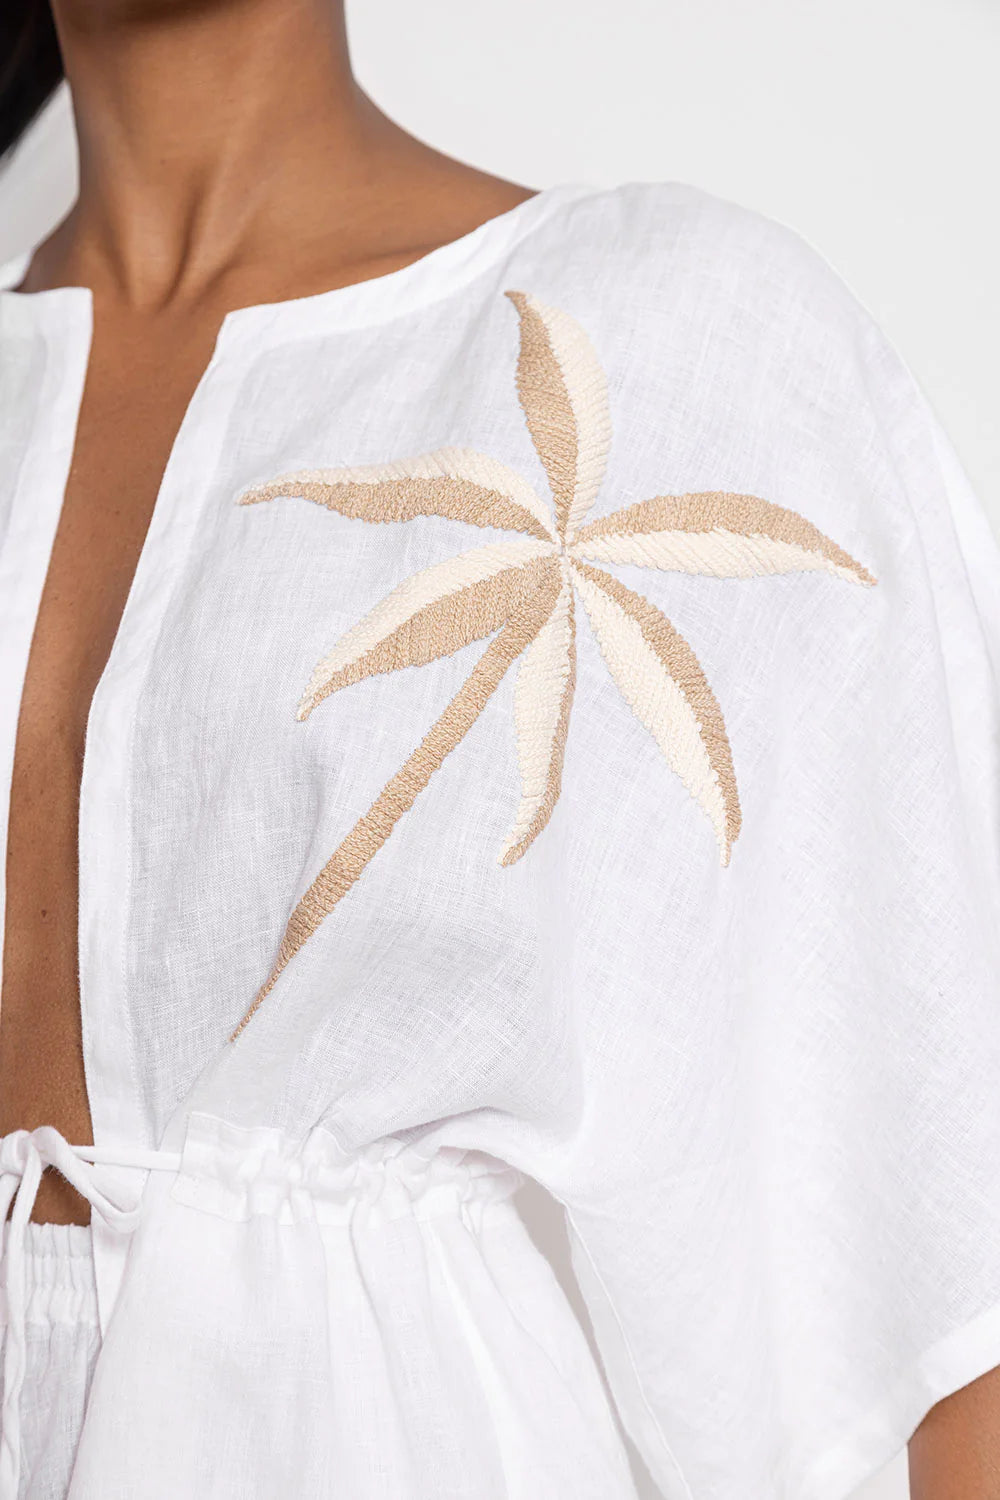 Sundress Adela Cover up white with palm tree hand embroidered